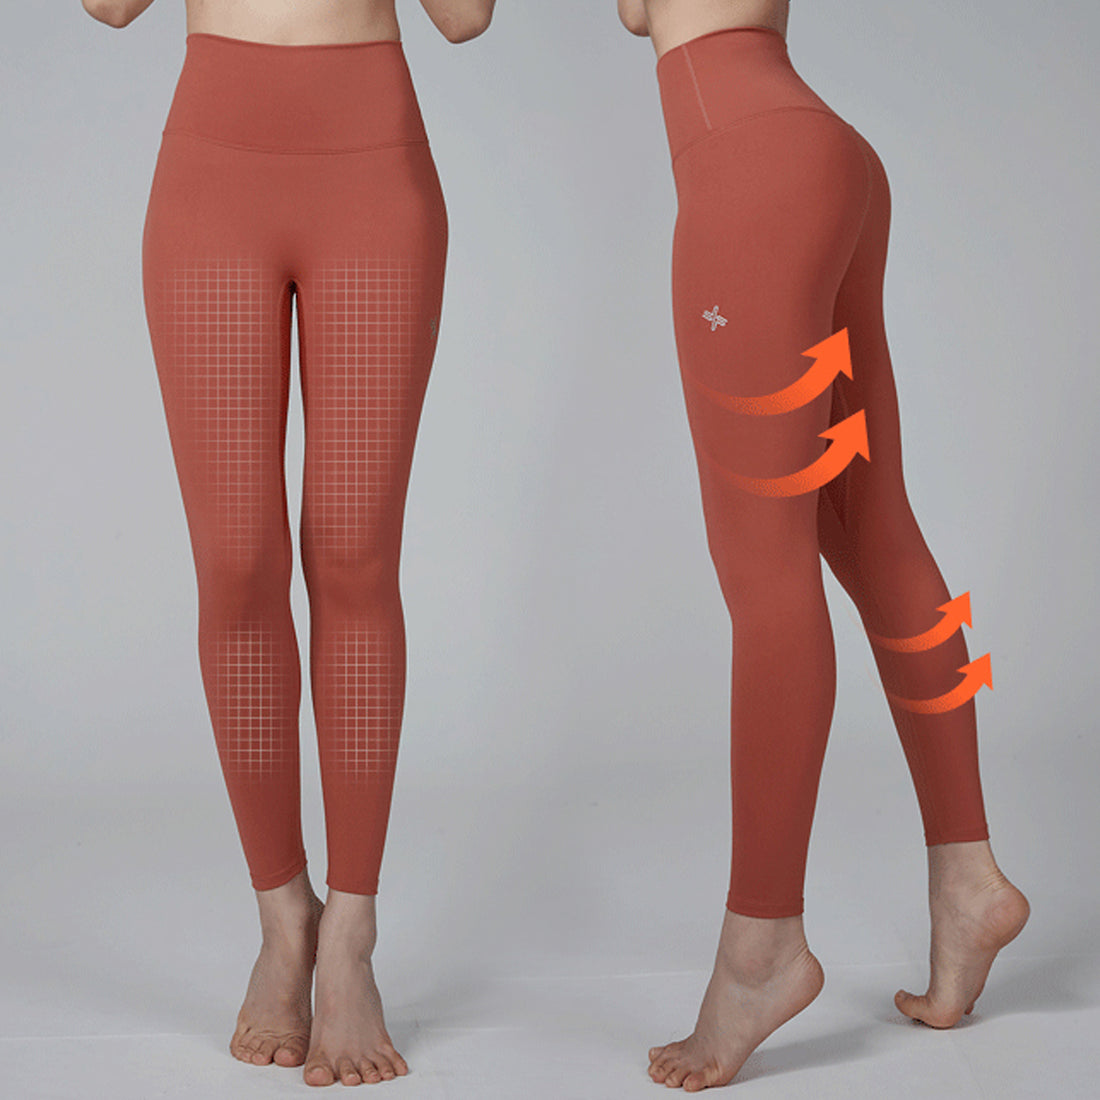 Take a closer look to our CELLA V-UP LEGGINGS in TERRACOTTA ✨ • Anti Camel- Toe & Perfect High Rise Fit! #XEXYMIX